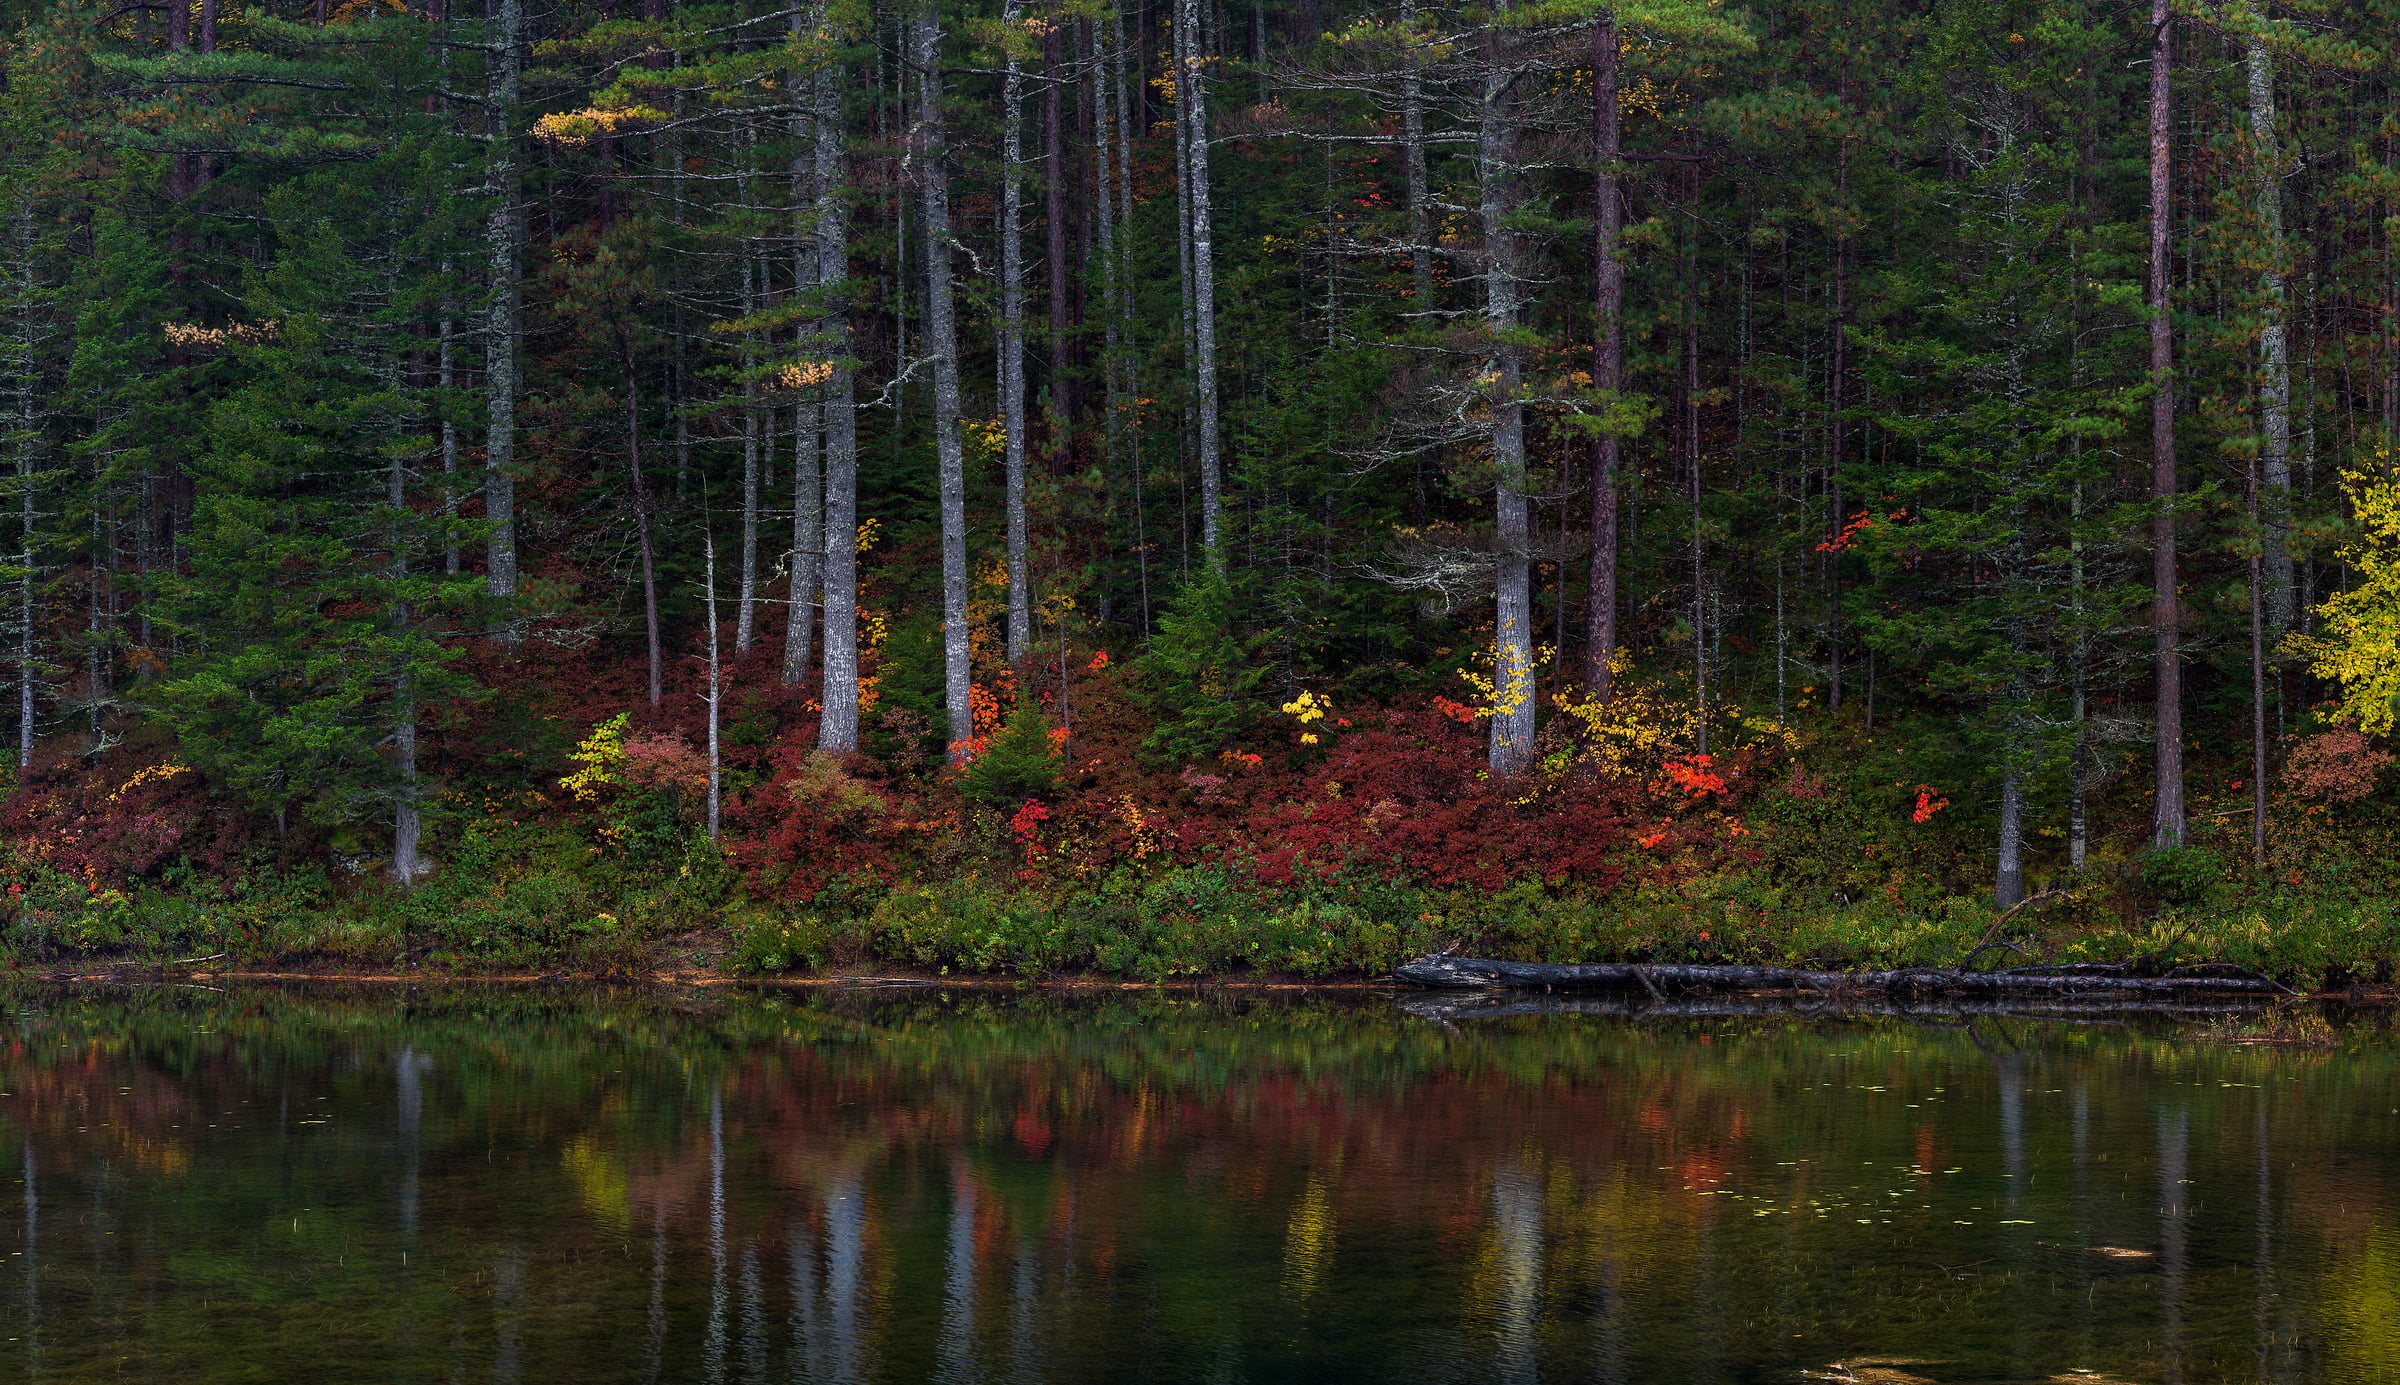 715 megapixels! A very high resolution, large-format VAST photo print of woods with a pond in the foreground; nature photograph created by Aaron Priest in Abol Pond, Greenville, Maine